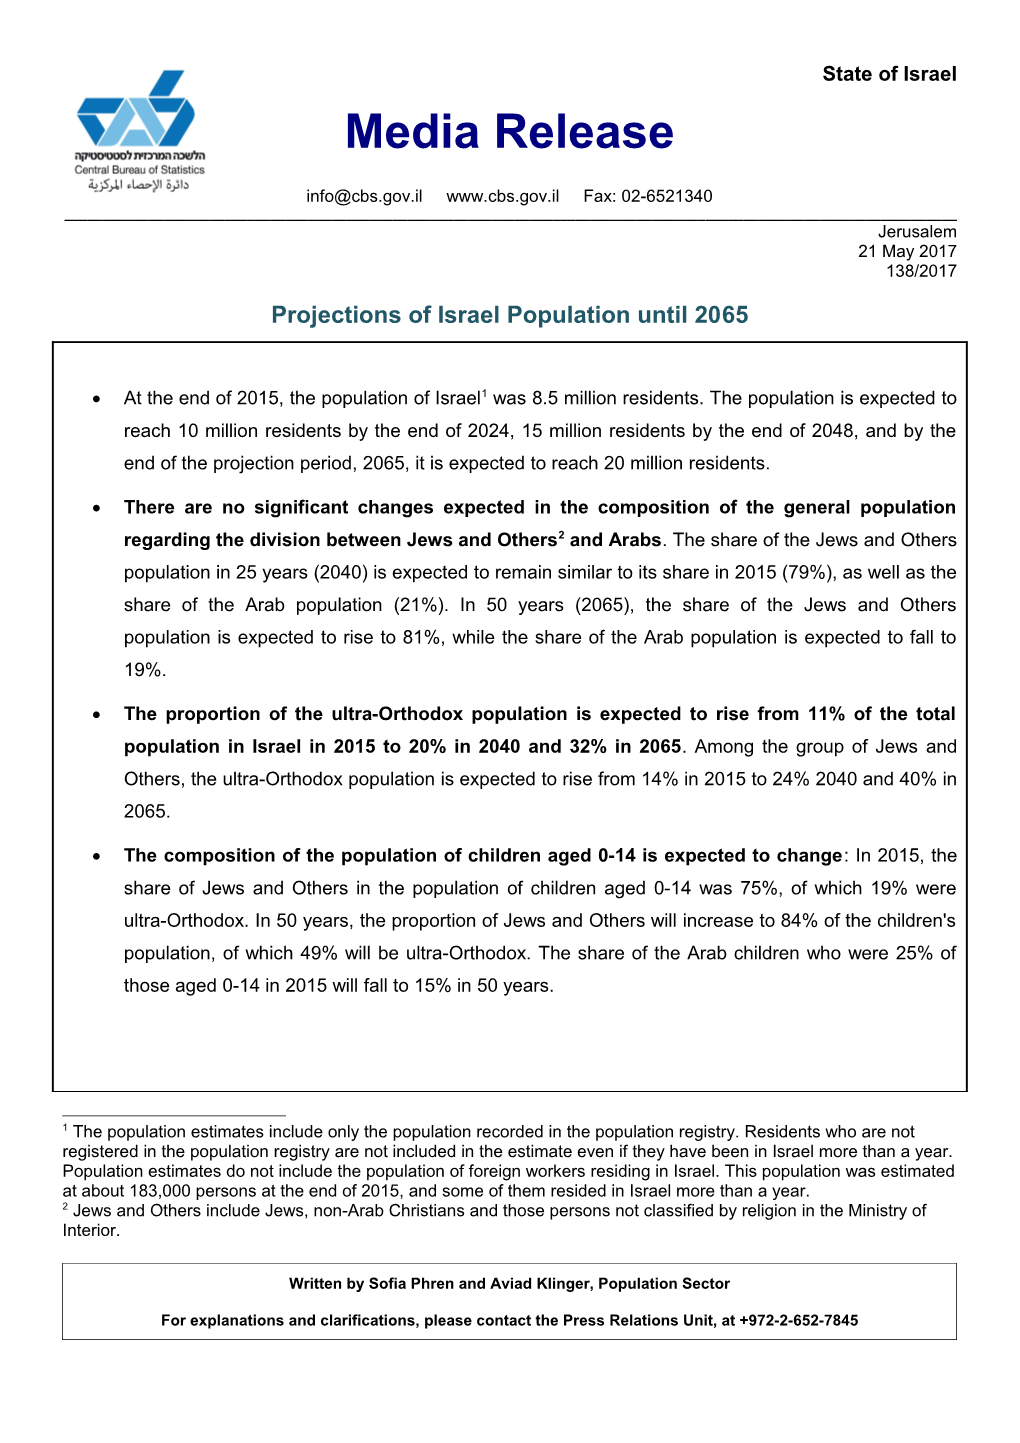 Projections of Israel Population Until 2065